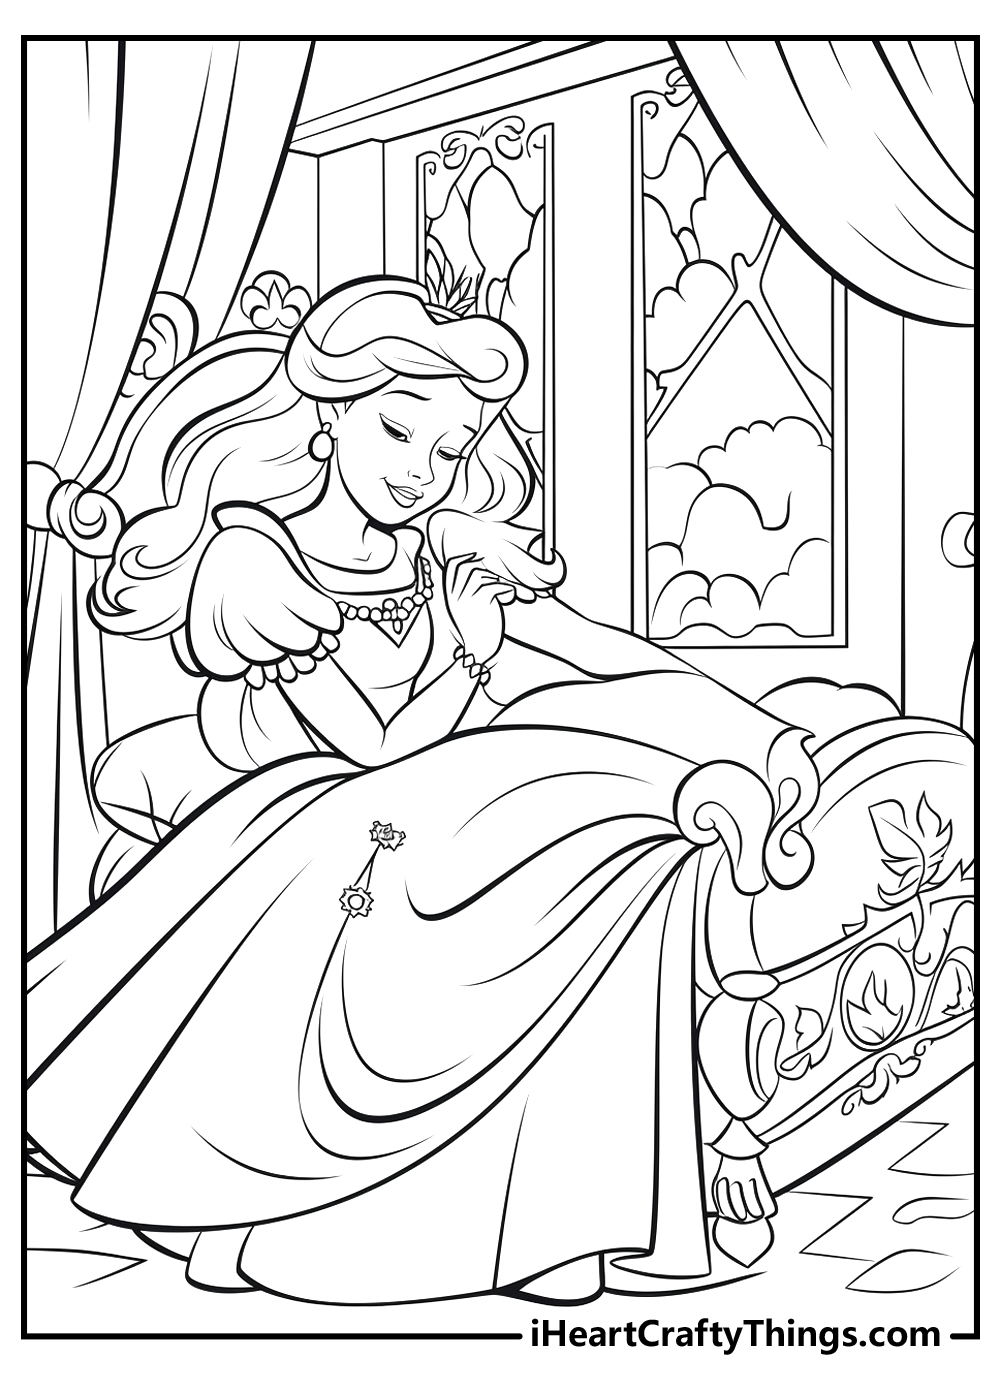 black-and-white sleeping beauty coloring printable